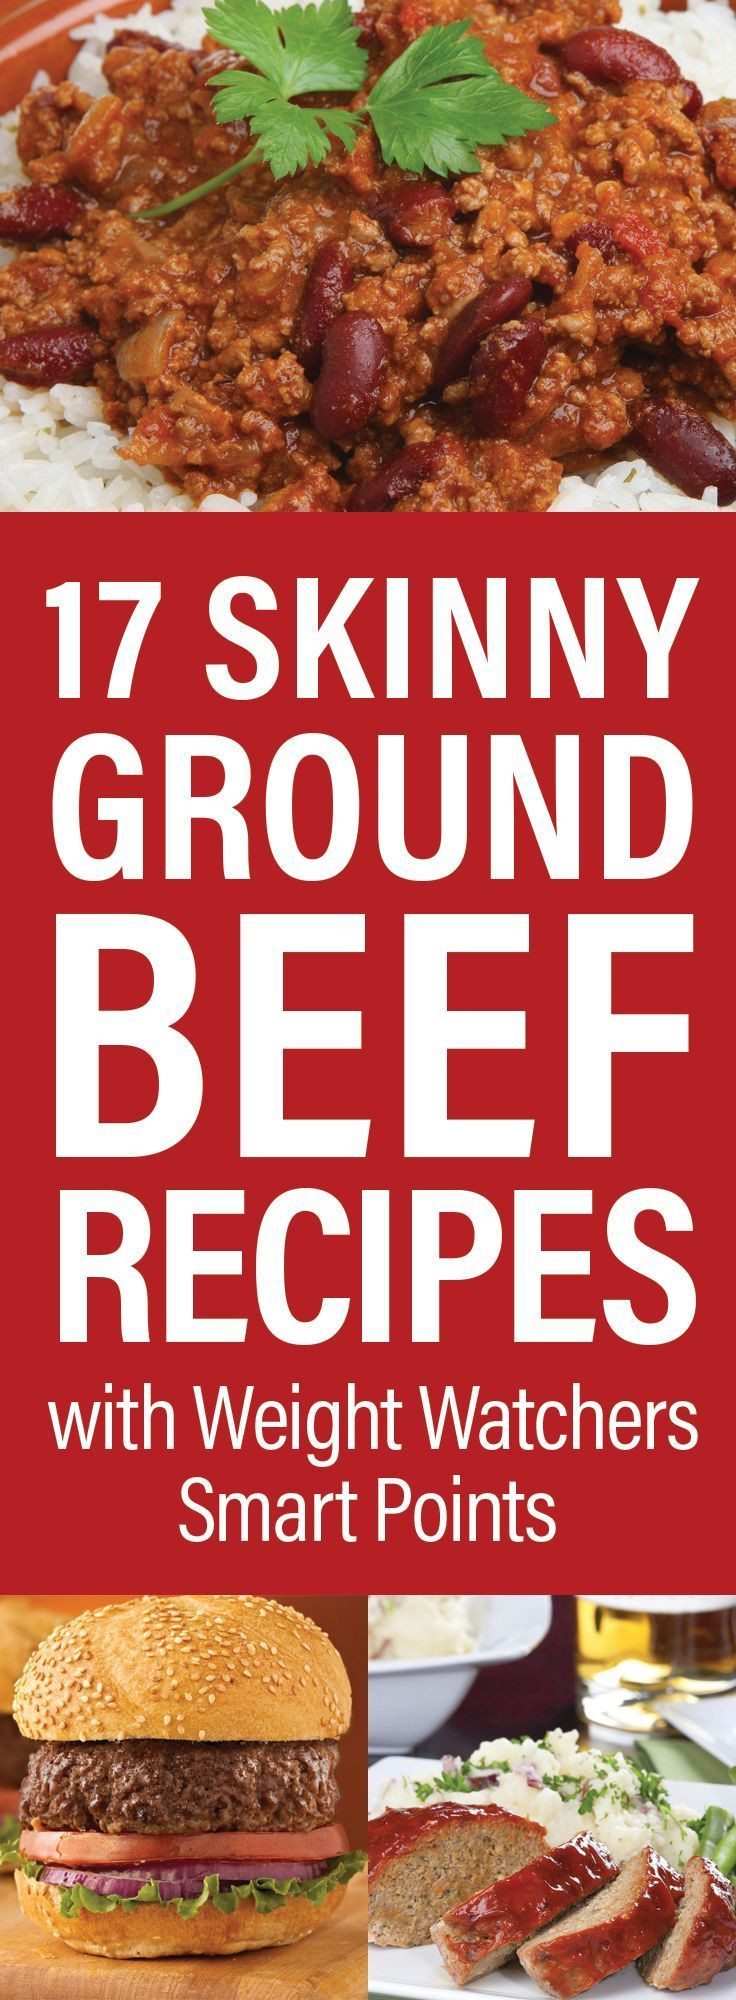 Weight Watchers Recipes With Ground Beef
 Pin on COOKING WEIGHT WATCHERS